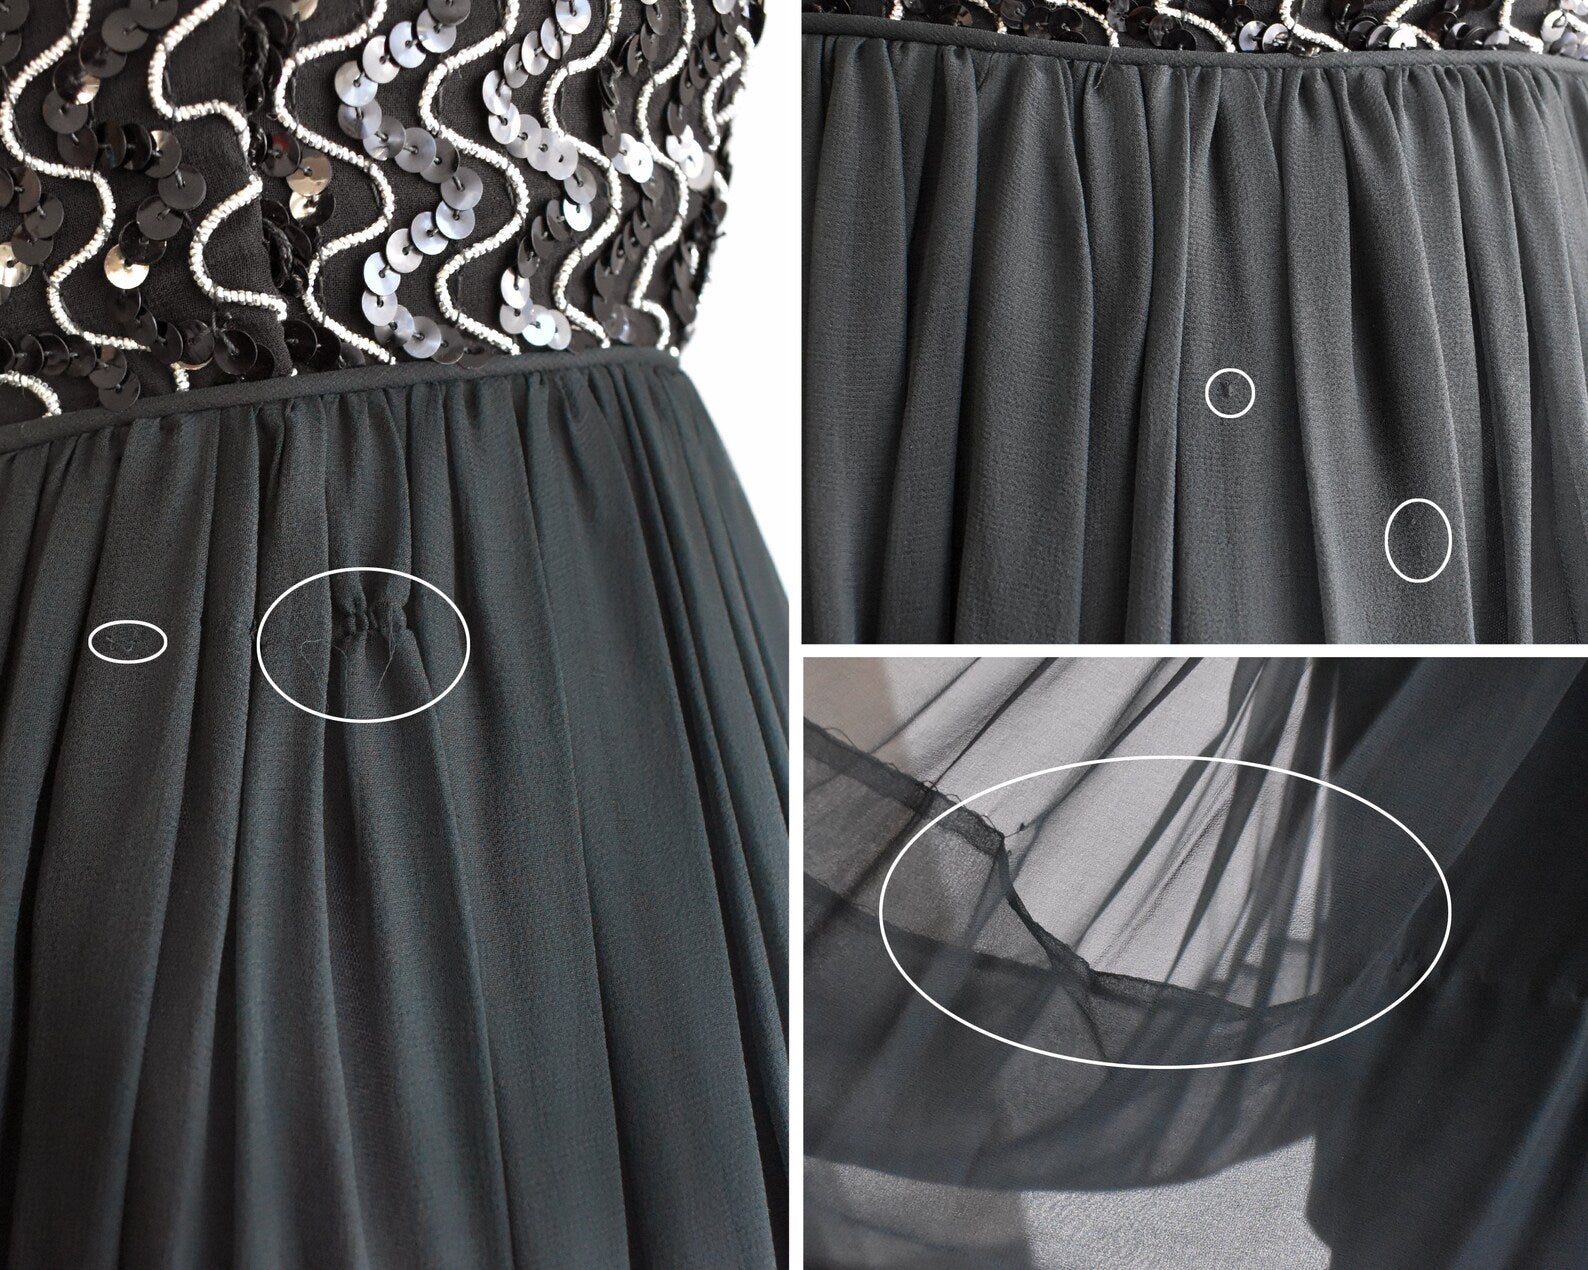 A photo of collage of some small flaws. Left photo shows some small runs on the side of the skirt. The top right shows a few snags, and the bottom right shows where the hem on the chiffon has fallen